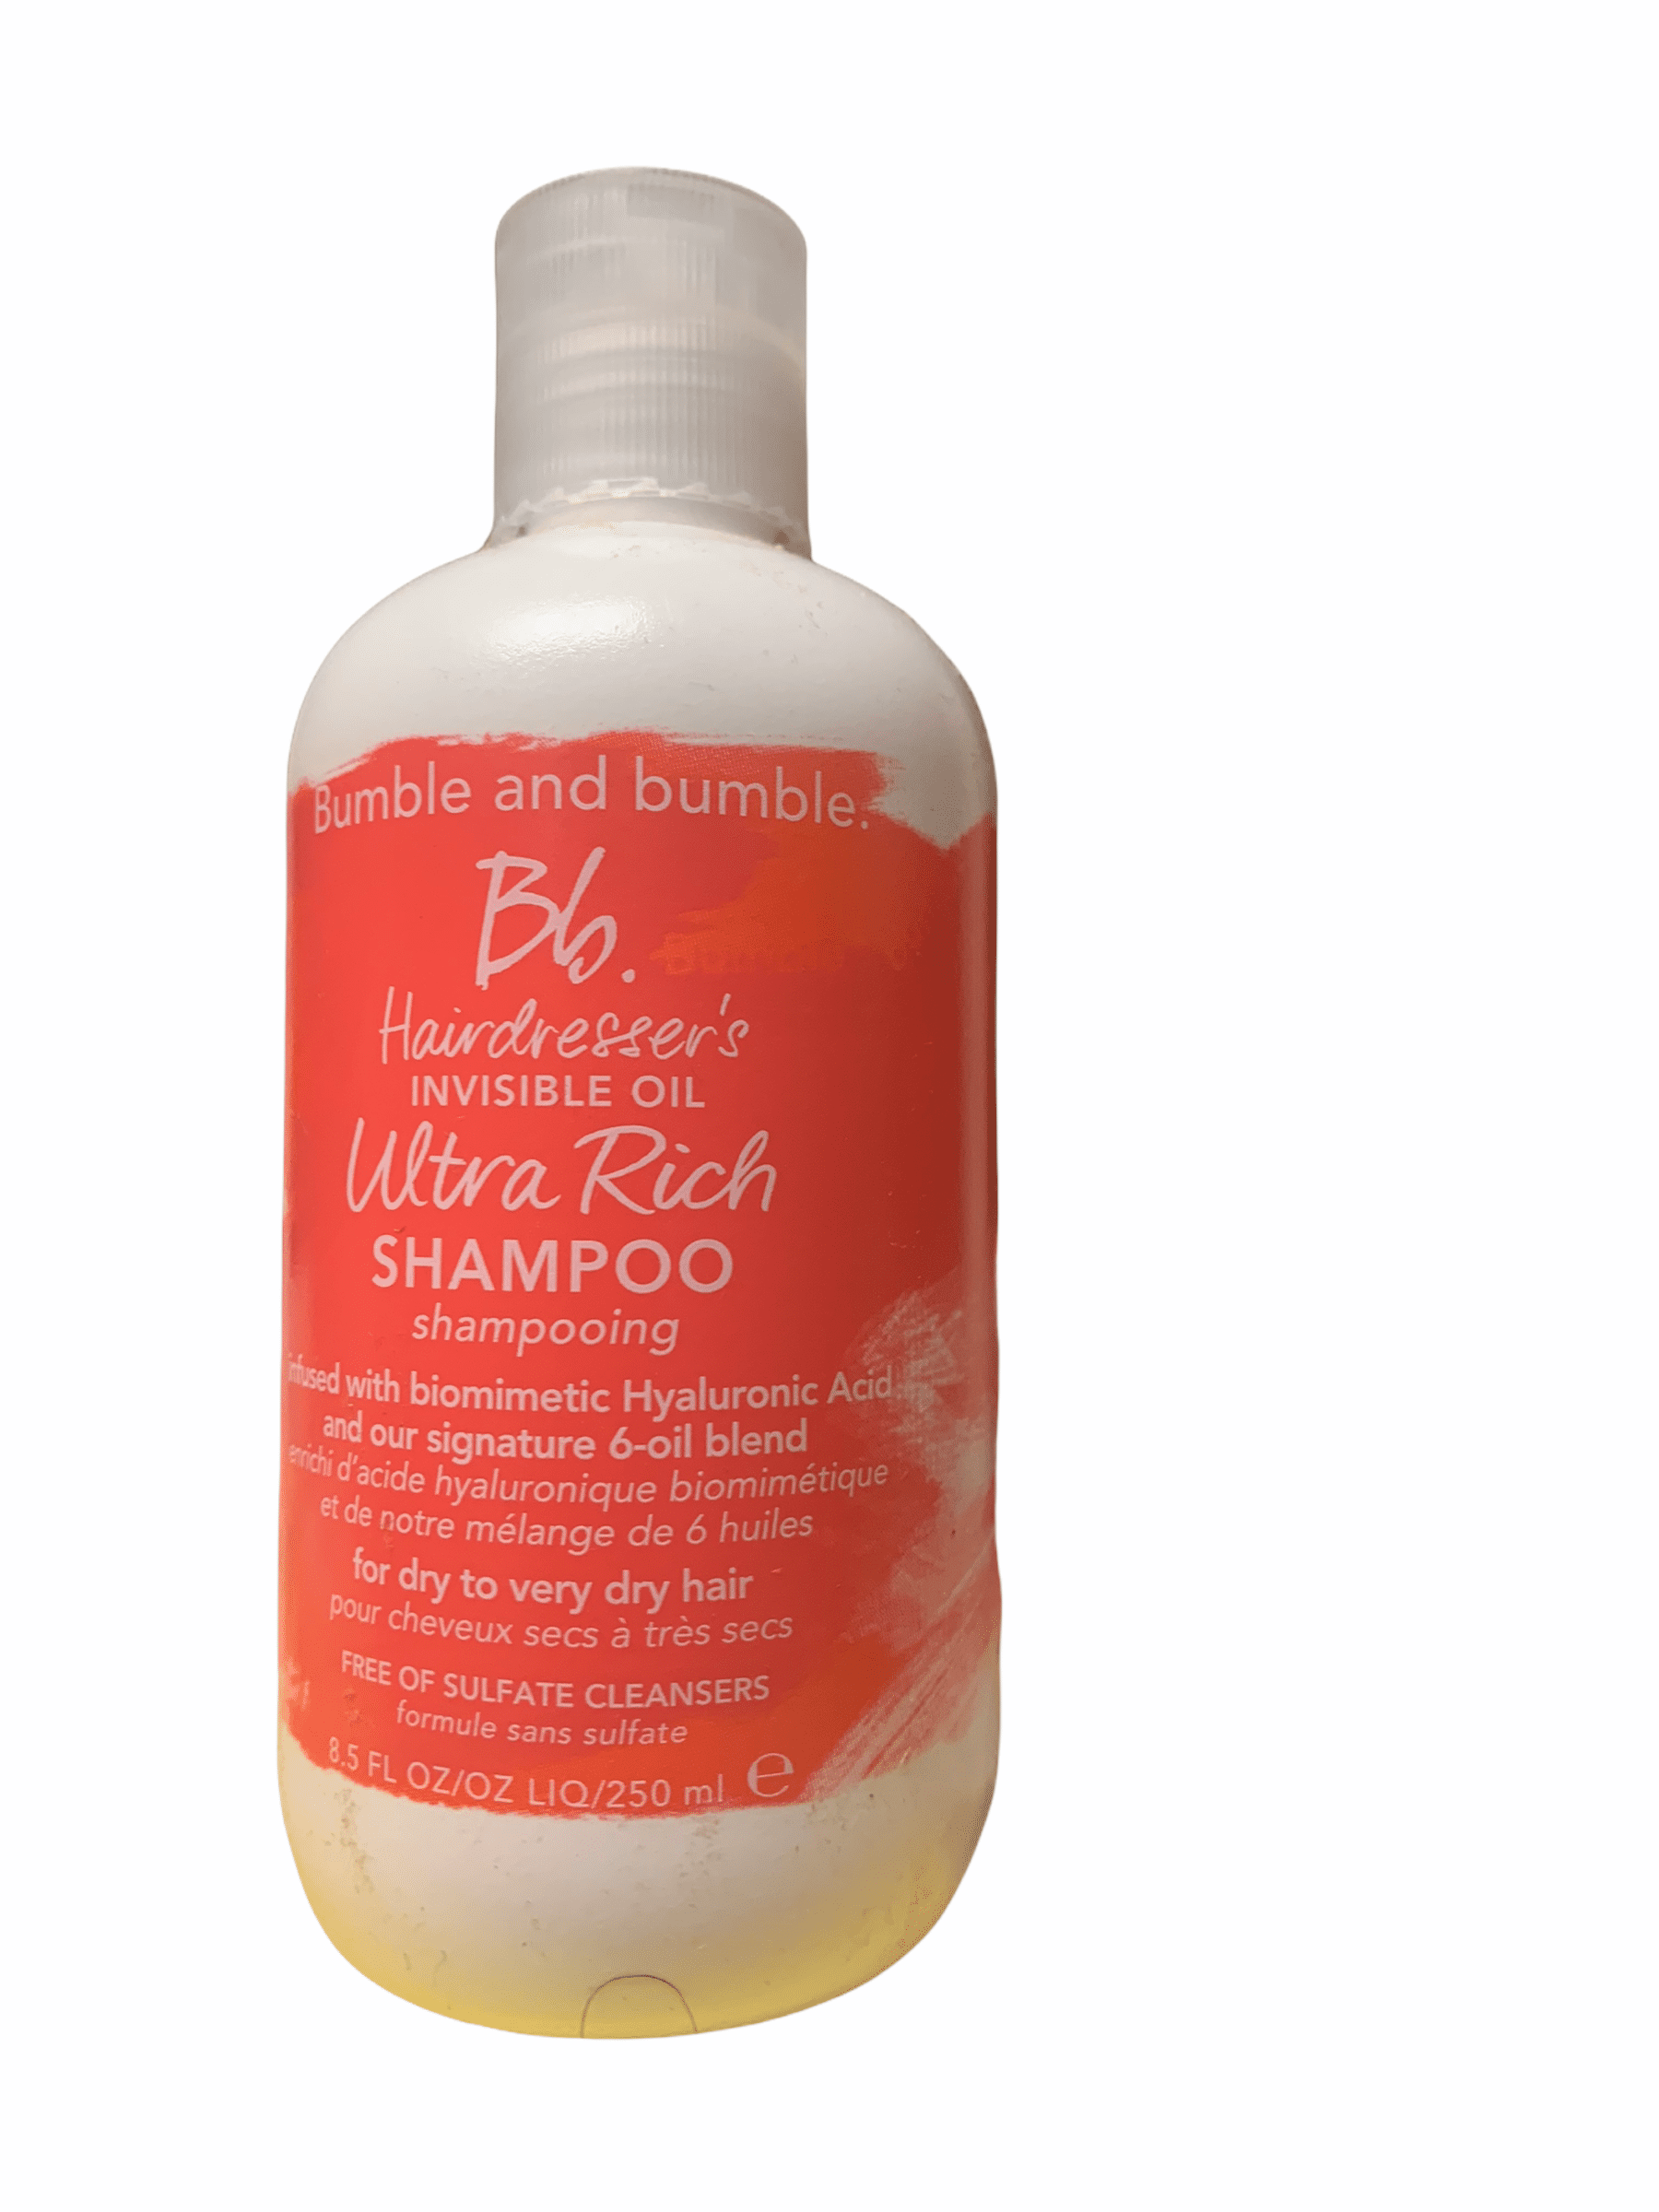 Bumble and Bumble Hairdresser's Invisible Oil Shampoo 8.5 OZ Walmart.com